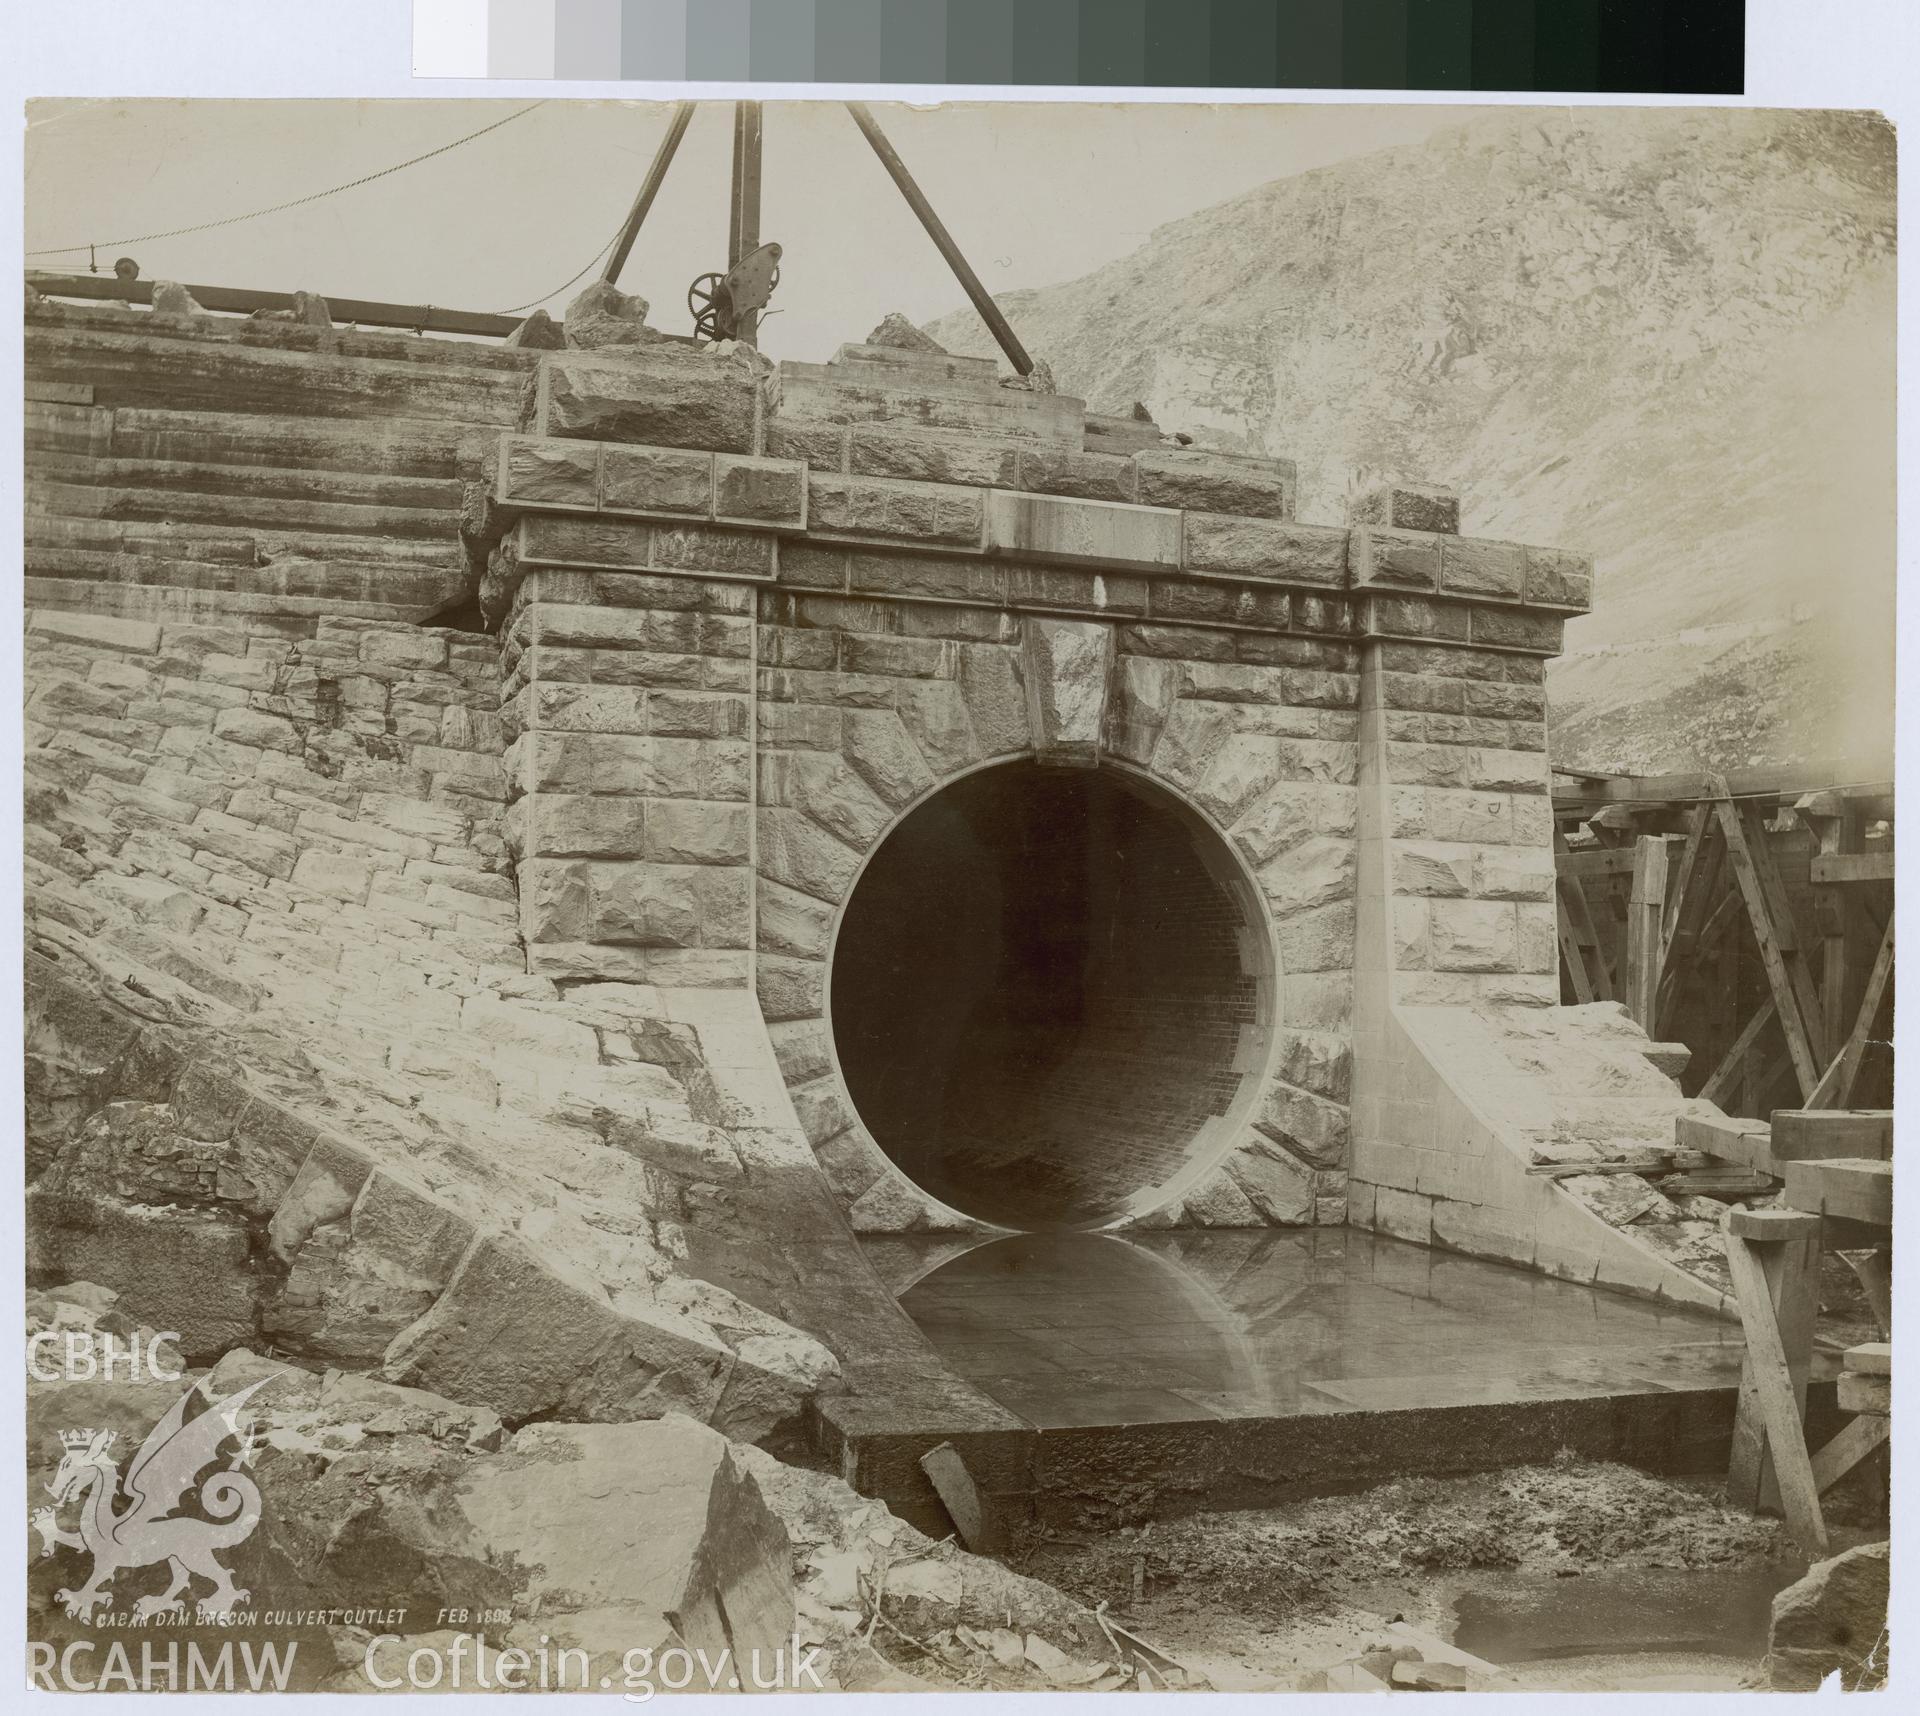 Digital copy of an albumen print from Edward Hubbard Collection showing the Brecon culvert outlet at Caban Dam, taken February 1898.